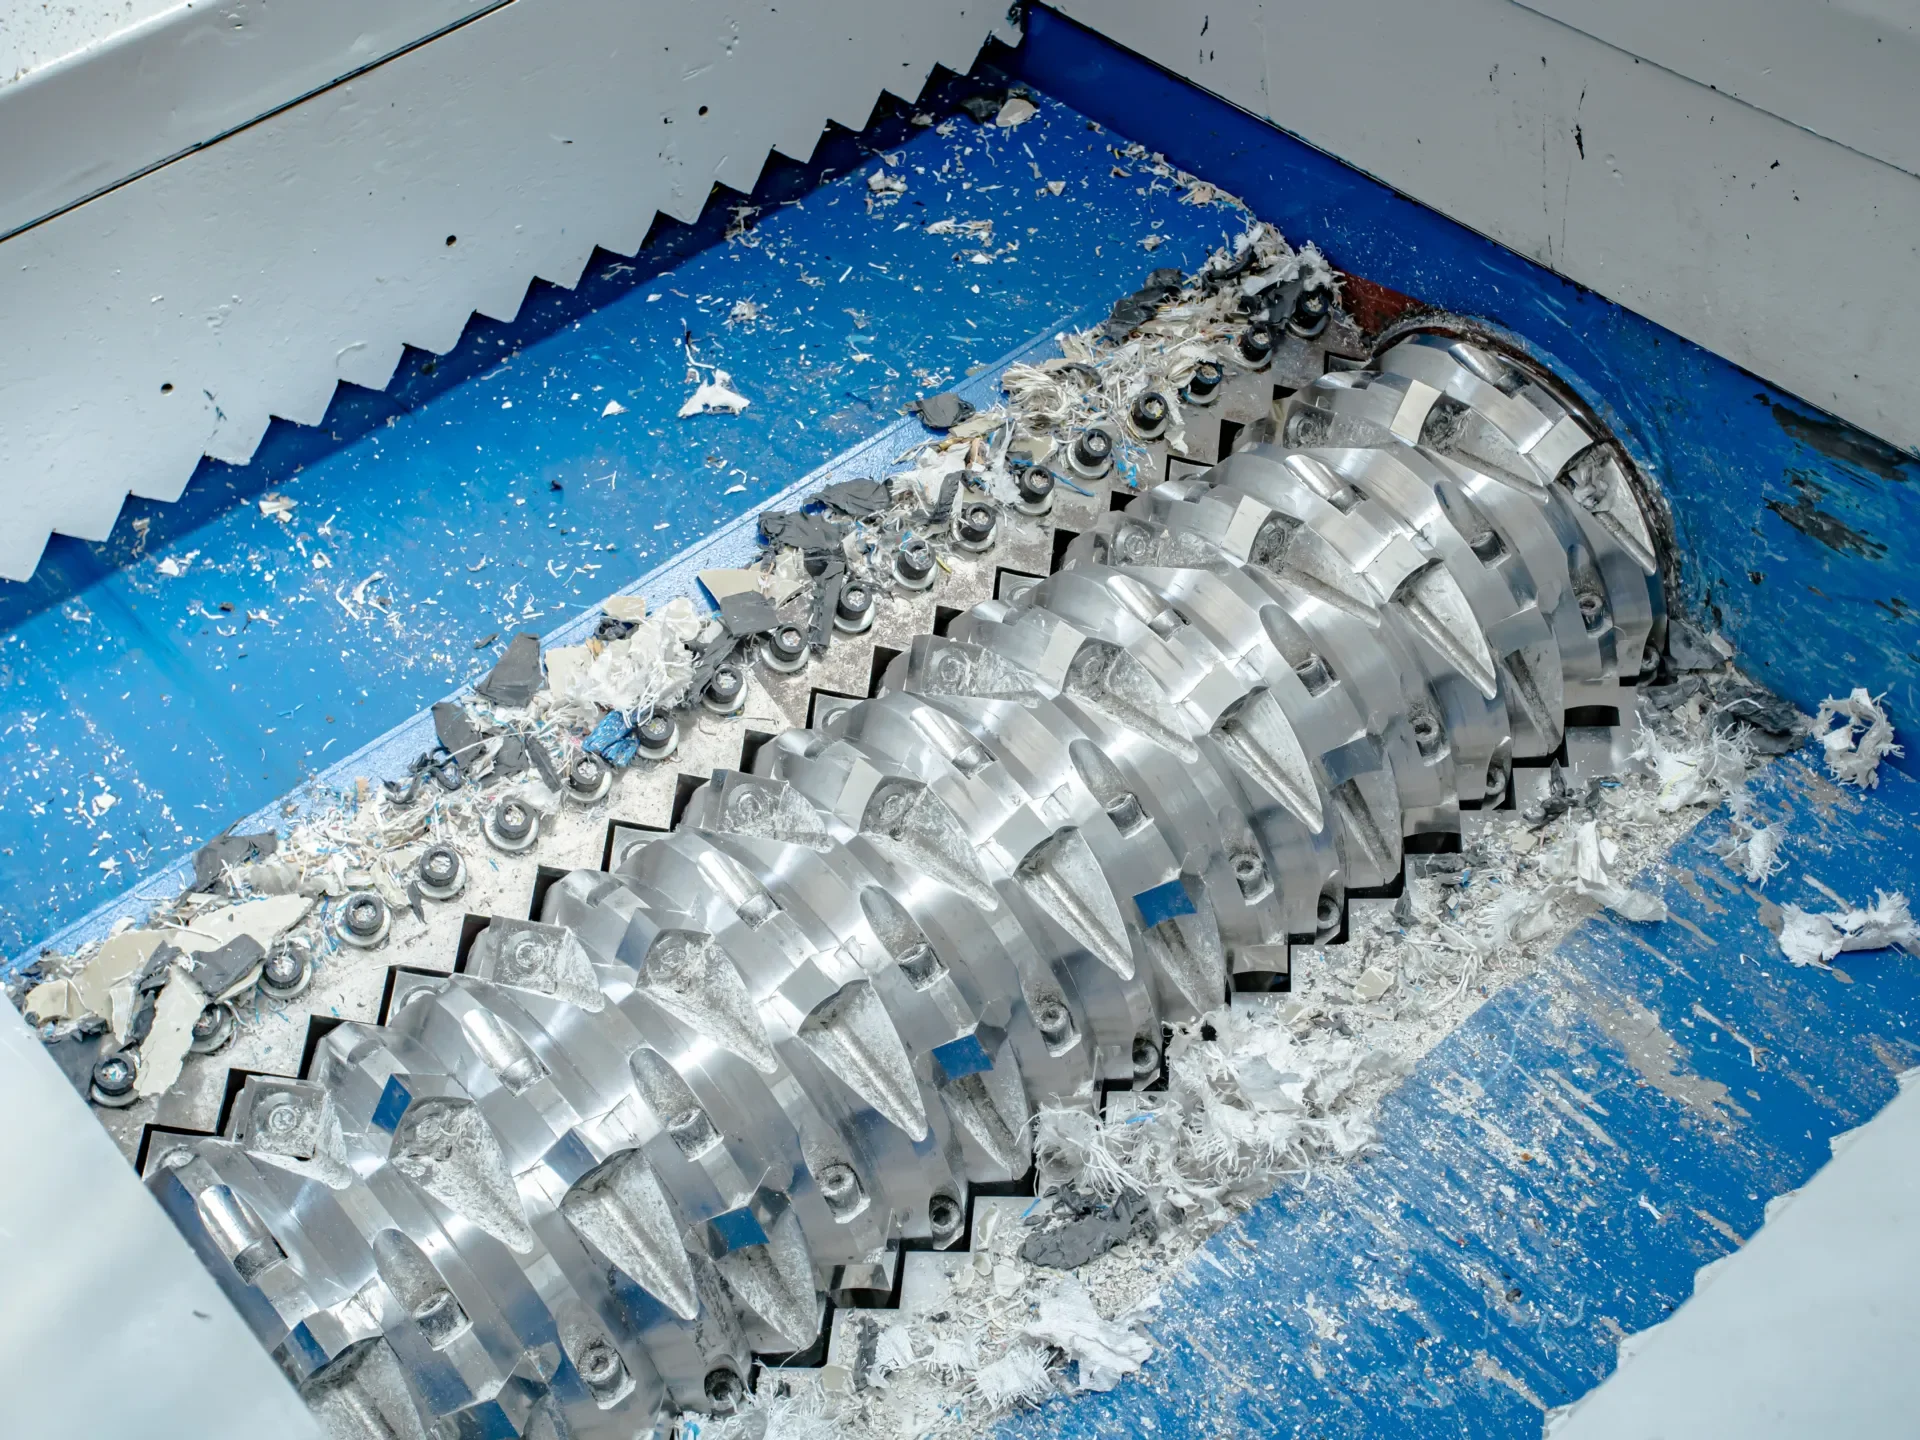 Close-up view of a single-shaft shredder's cutting mechanism. The image shows the robust and sharp cutting blades of the shredder, designed to handle and break down various materials. The blades are mounted on a rotating shaft within a blue and white cutting chamber. Pieces of shredded material are visible, showcasing the shredder's effectiveness in processing waste. This machinery is ideal for recycling and waste processing applications, offering high efficiency and durability.